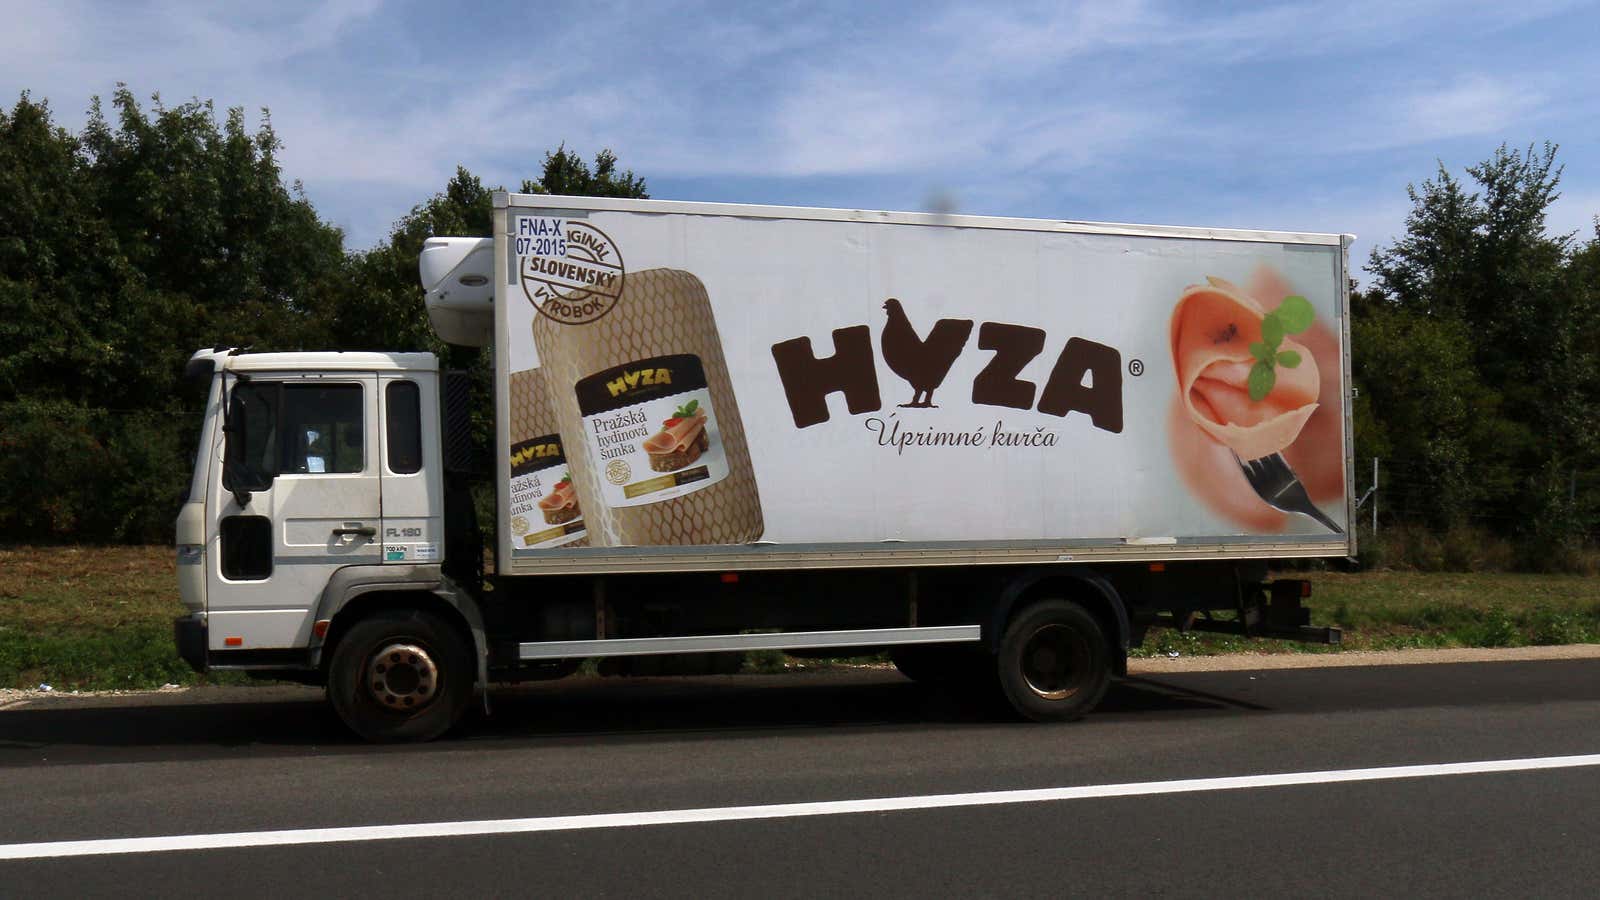 The truck bore the logo of a meat producer.